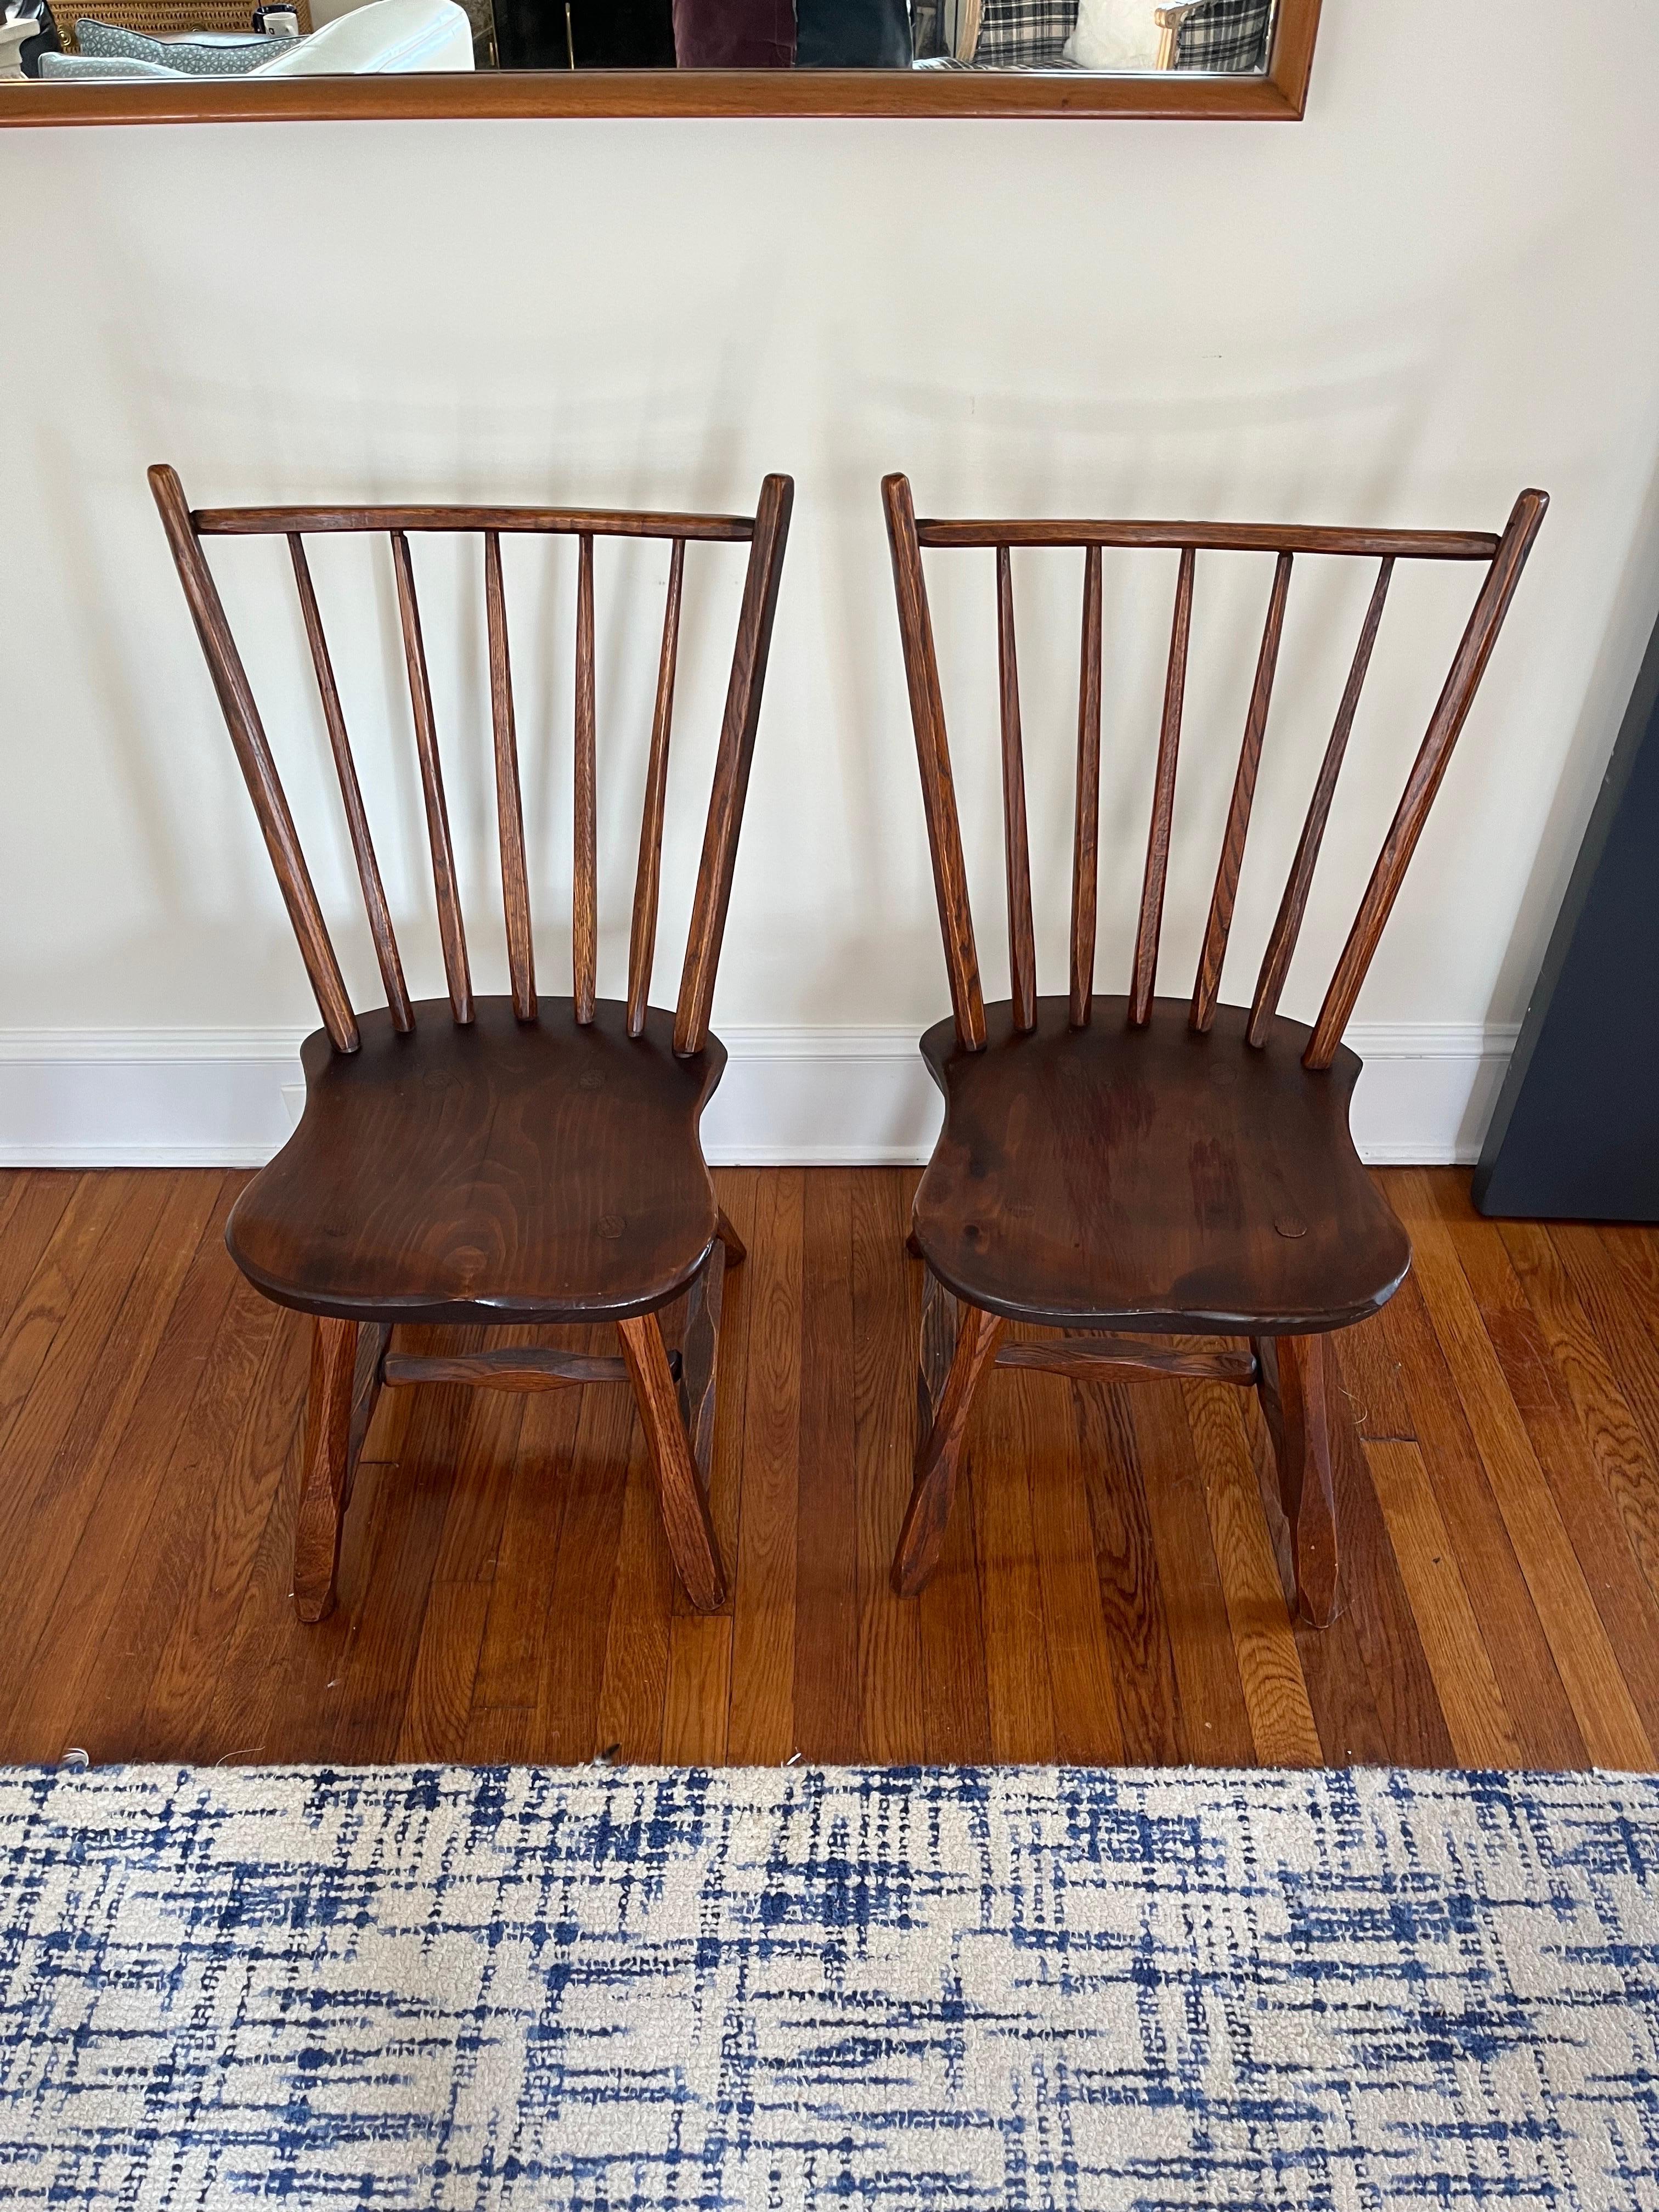 A set pair of handcrafted Primitive Hickory bentwood stick armchairs with sculpted pine seats. Wonderful rustic design with exposed peg finish and hewn legs and aged patina. 
Curbside to NYC/Philly $350